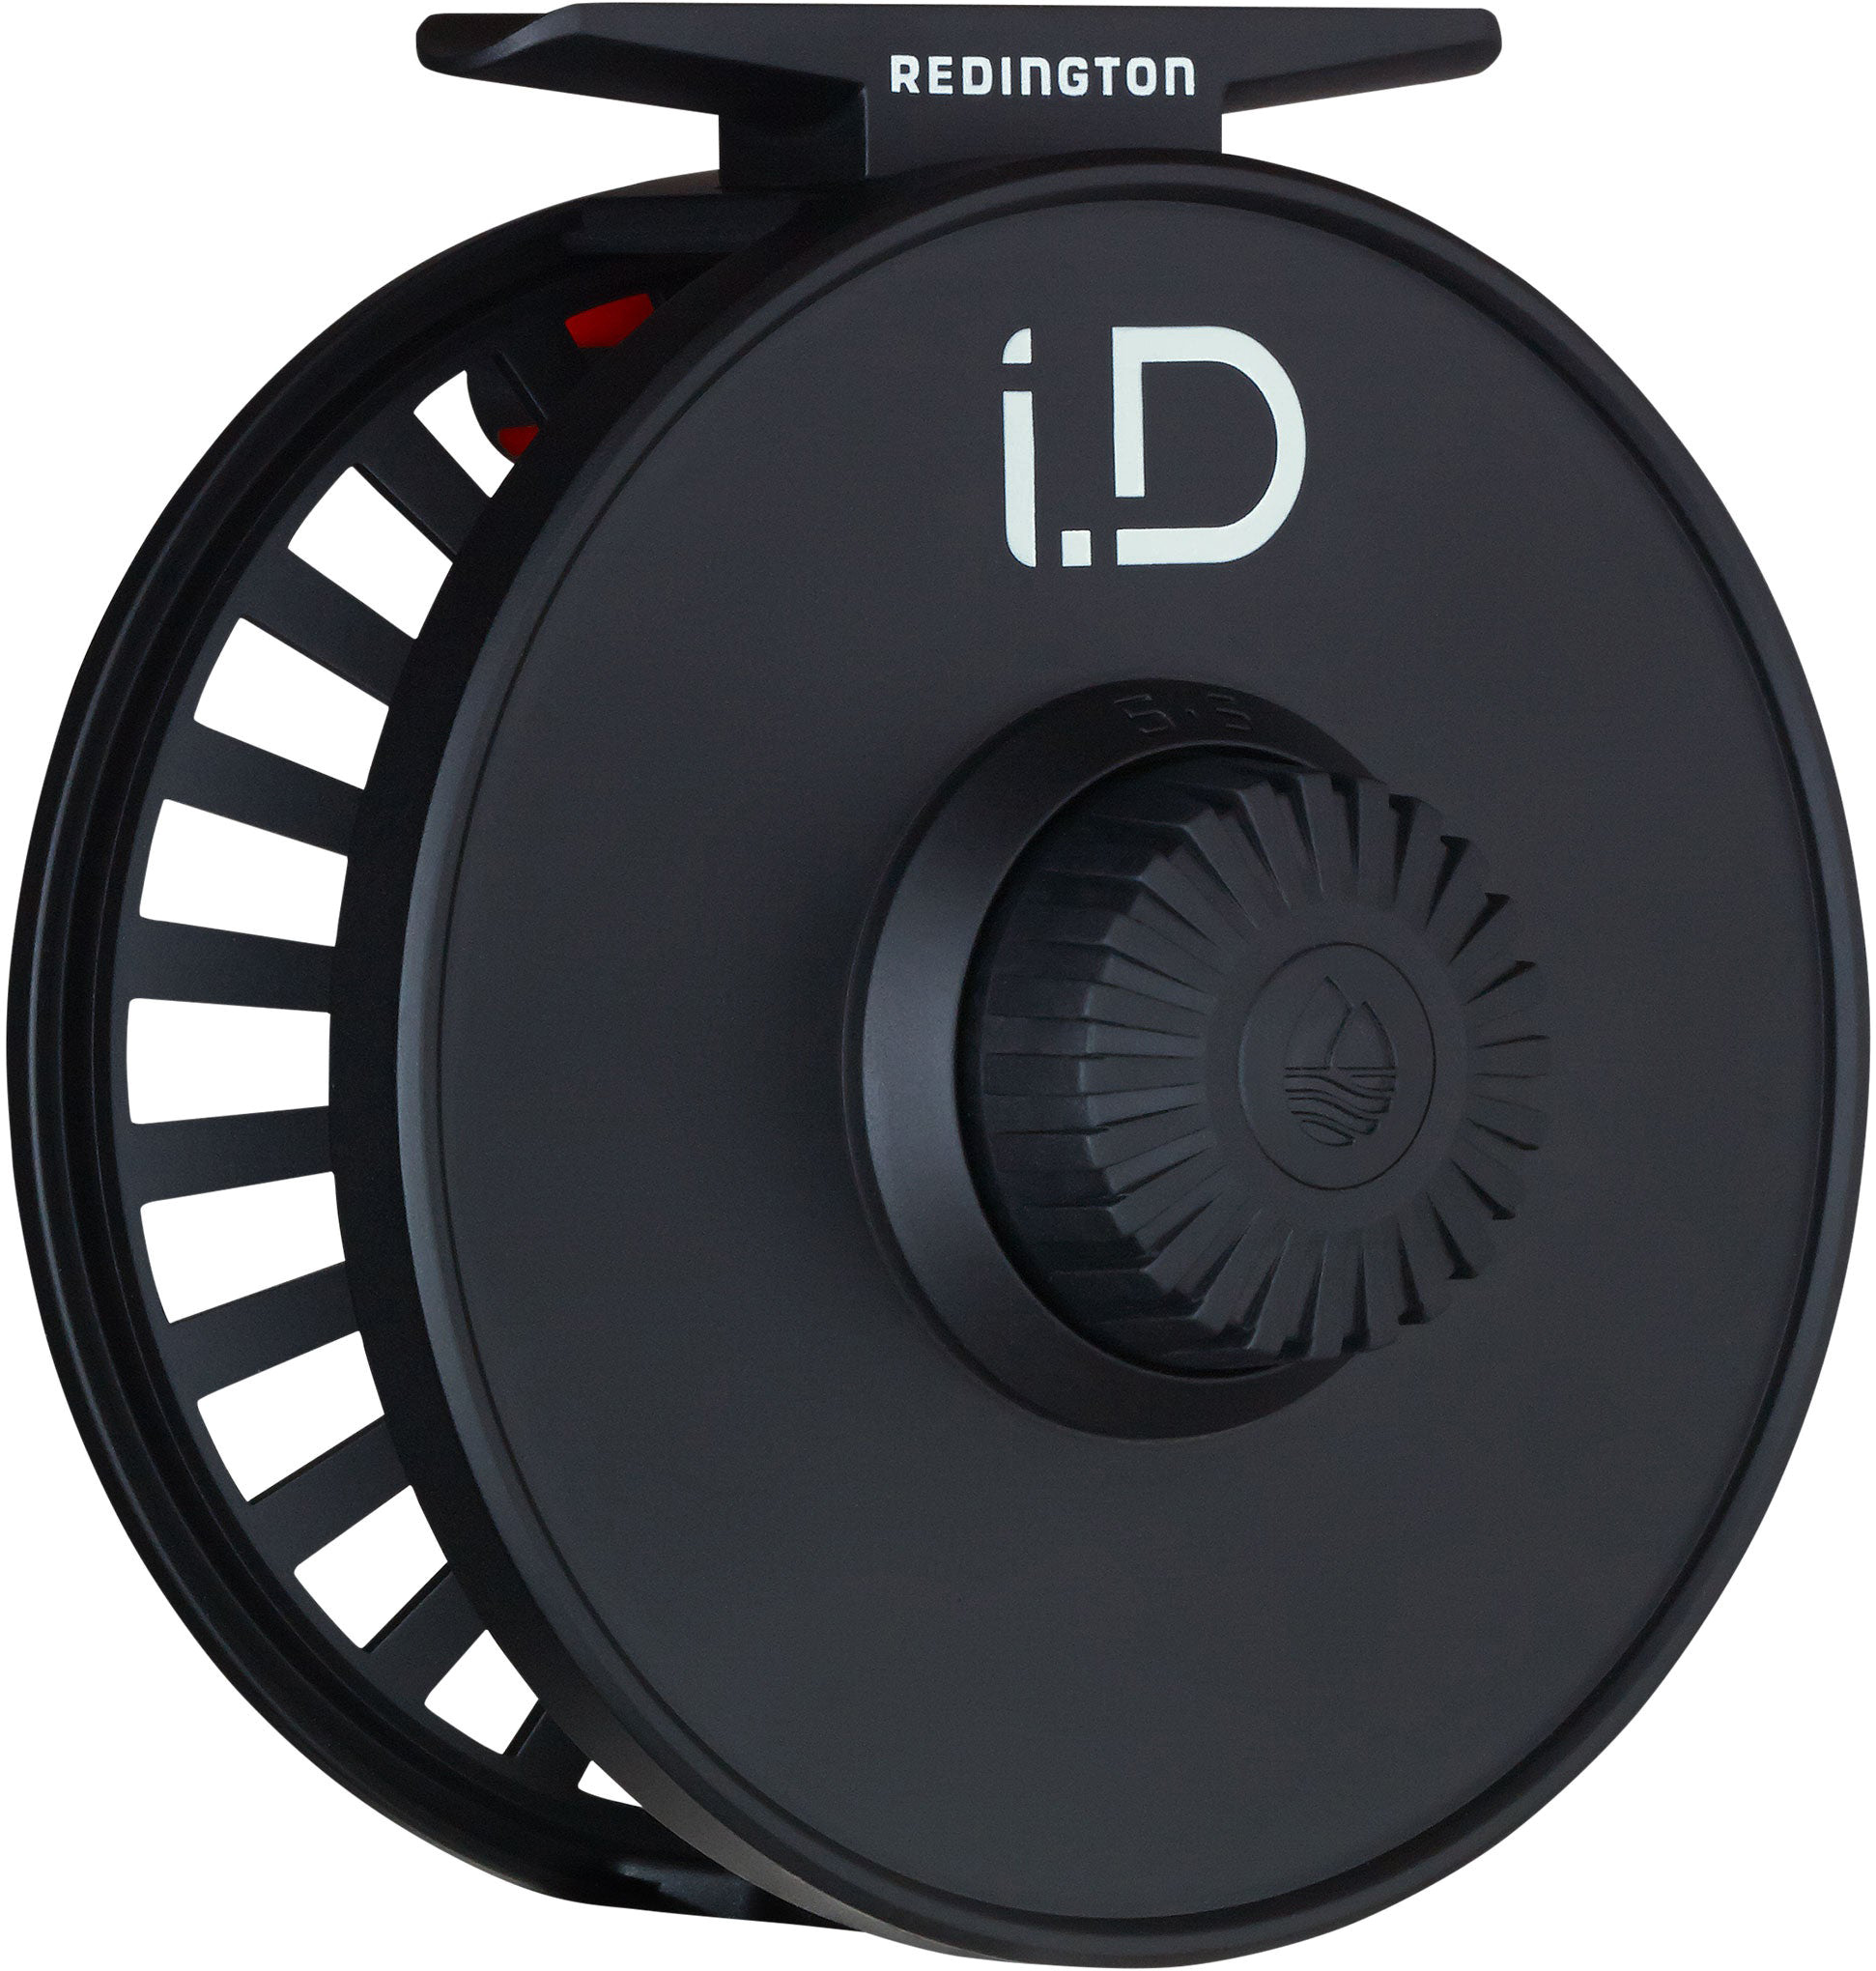 Redington i.D Fishing Reel 5-5510R56 , $4.00 Off with Free S&H — CampSaver